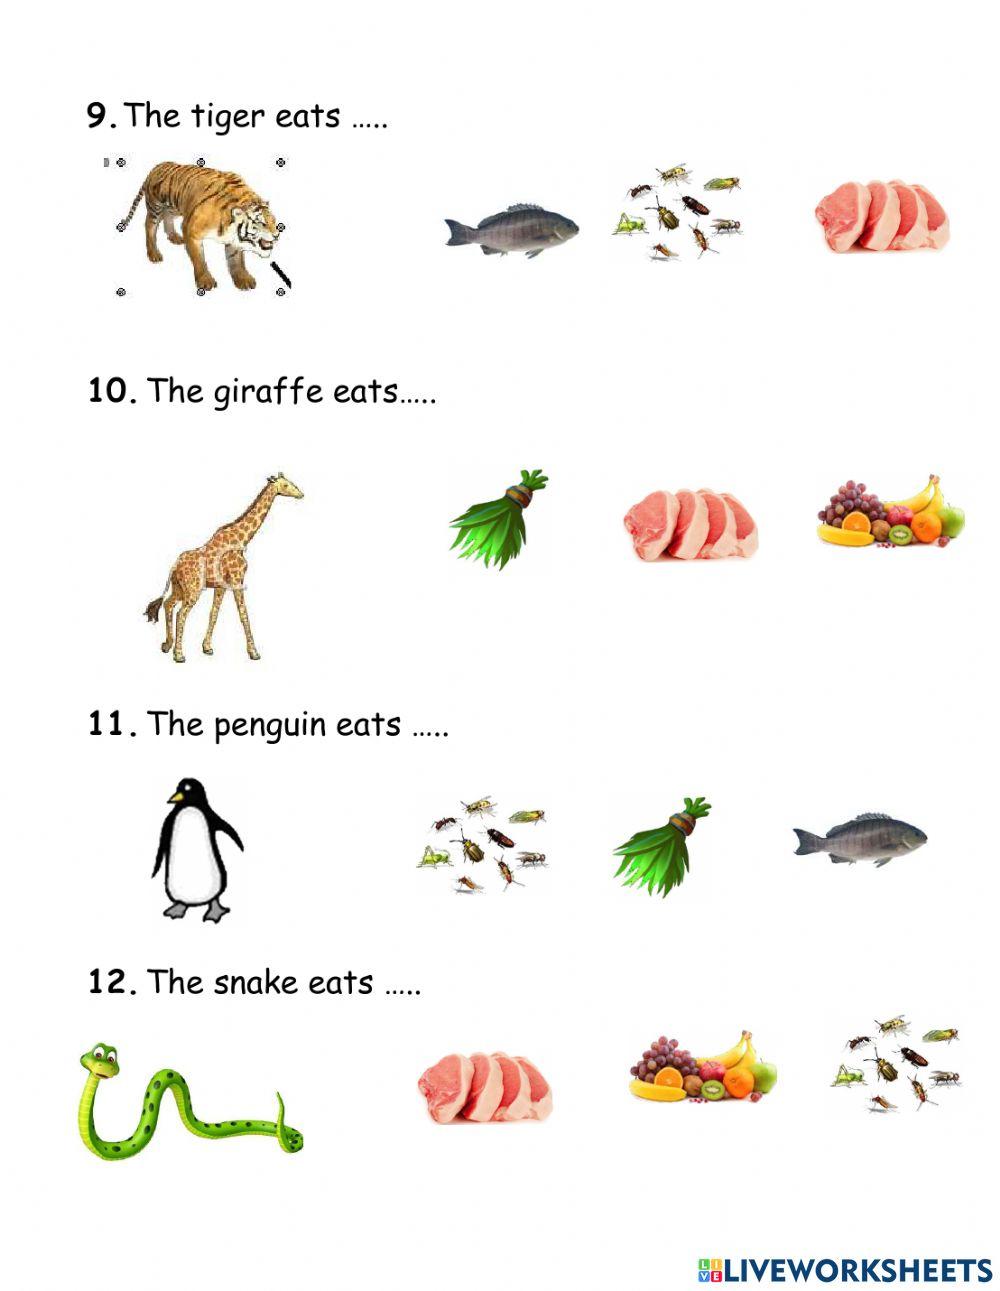 Zoo Animal and Their Diets